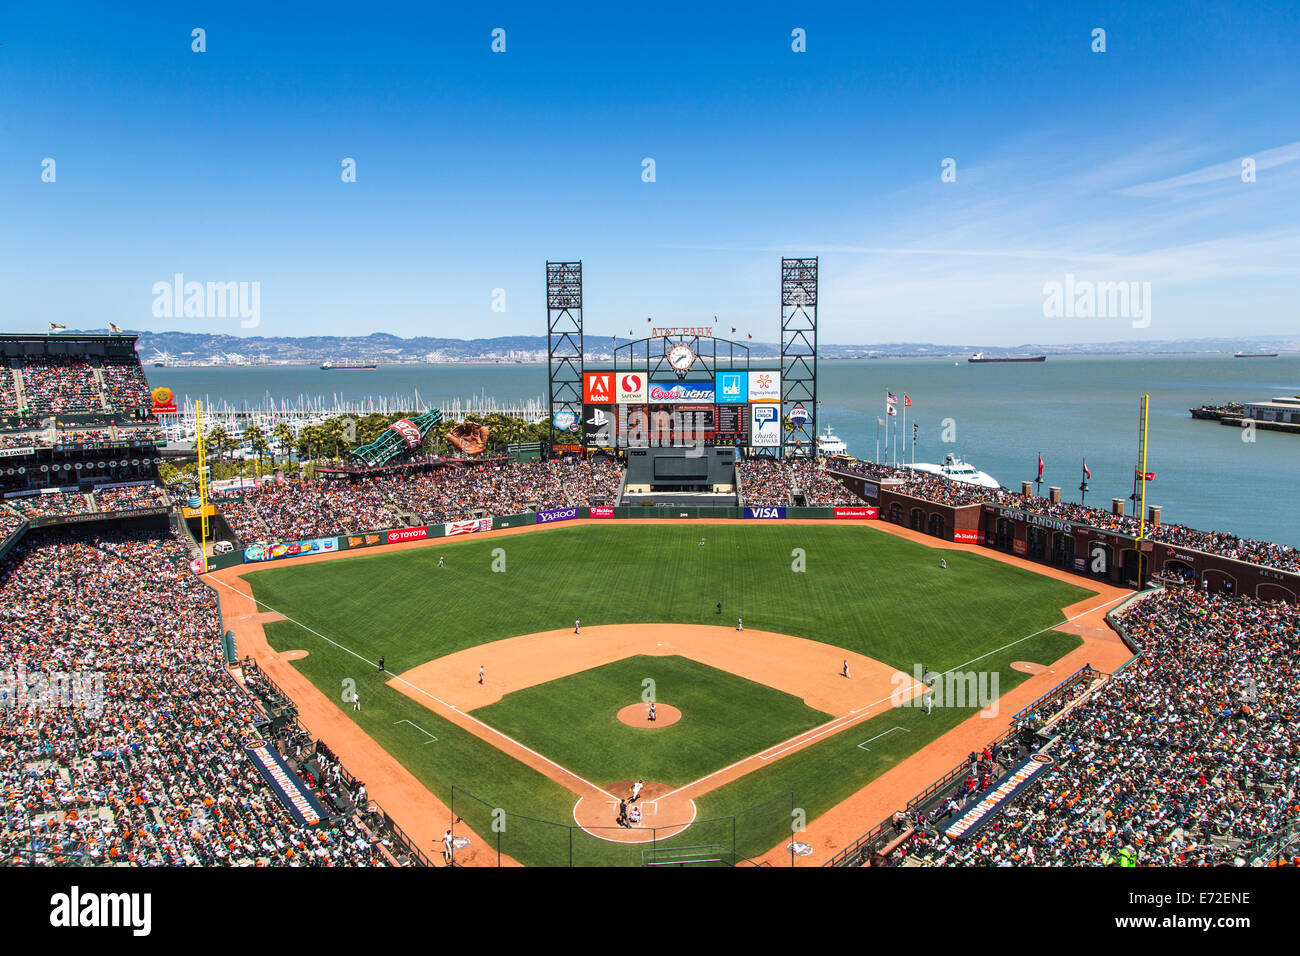 Overview of AT&T Park during San Francisco Giants baseball game in San Francisco, California, USA. Stock Photo